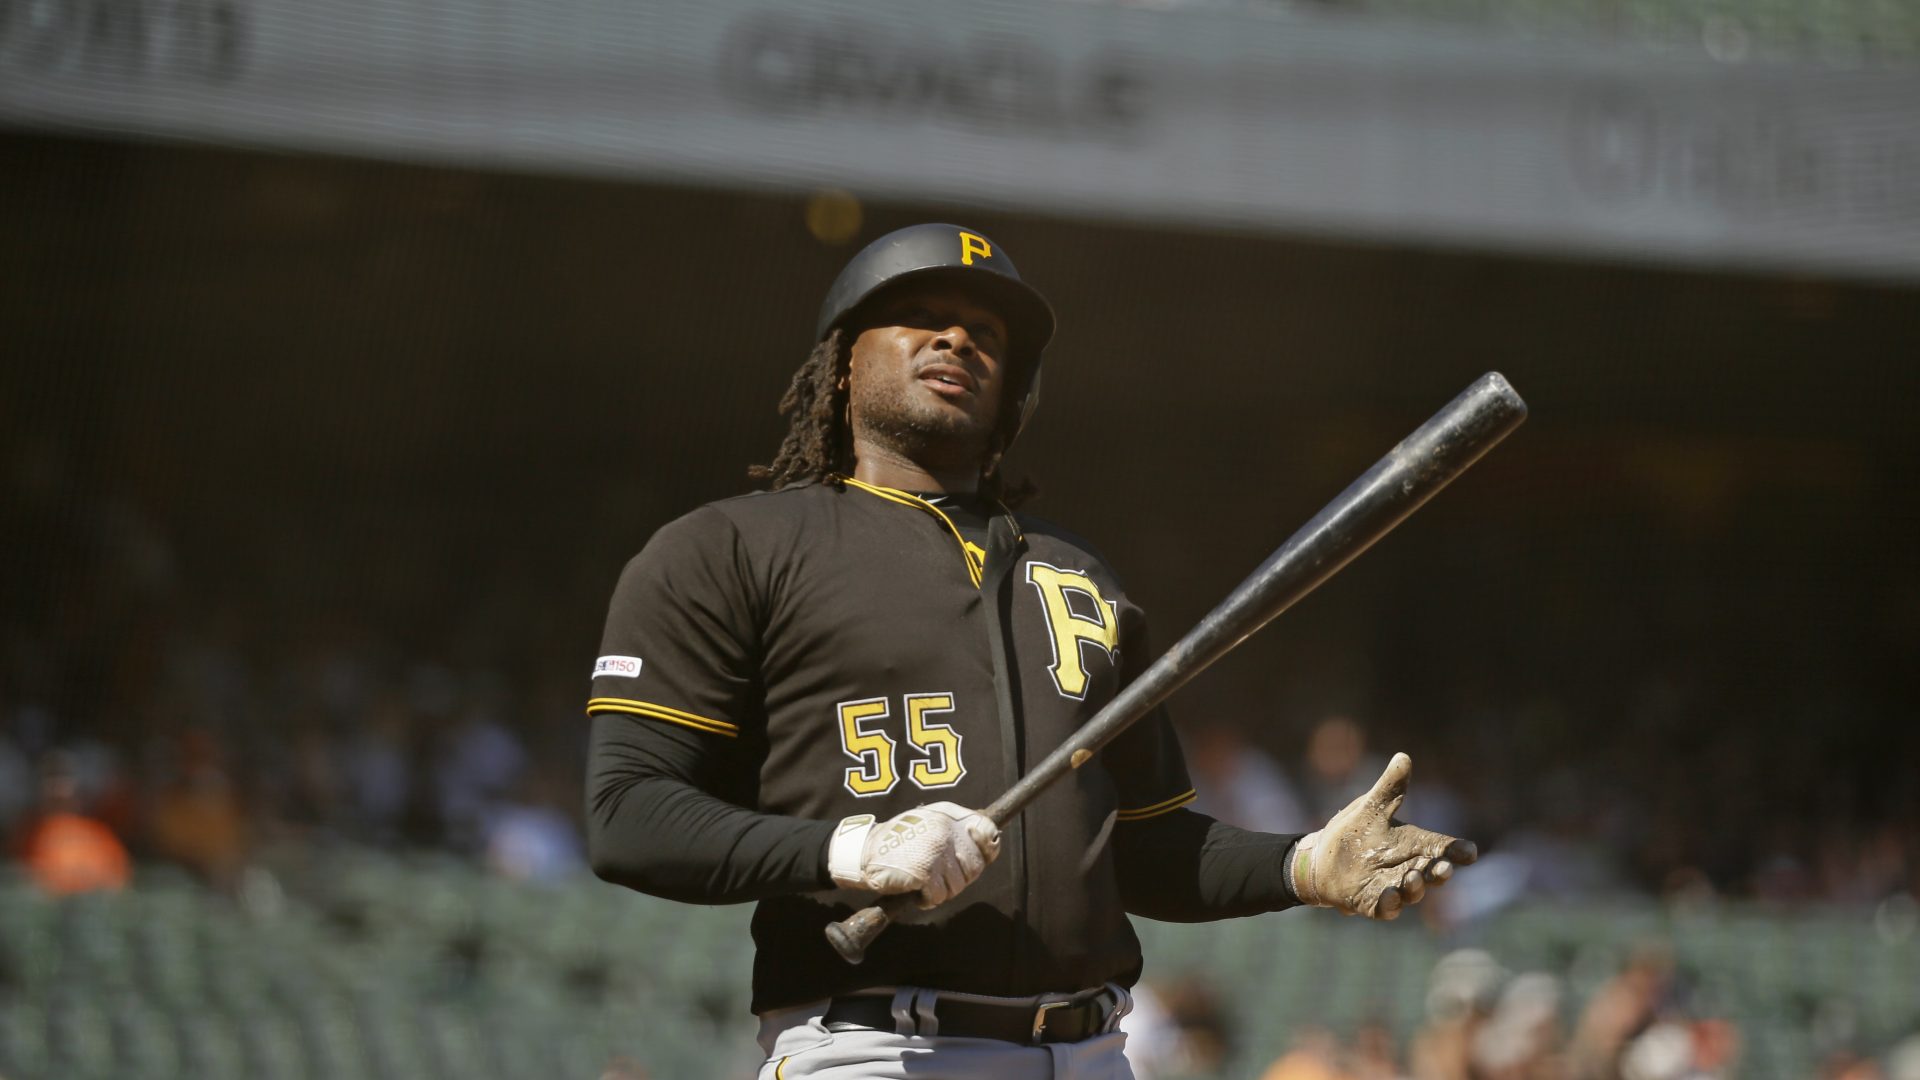 Pittsburgh Pirates' Josh Bell during a baseball game against the San Francisco Giants Thursday, Sept. 12, 2019, in San Francisco.